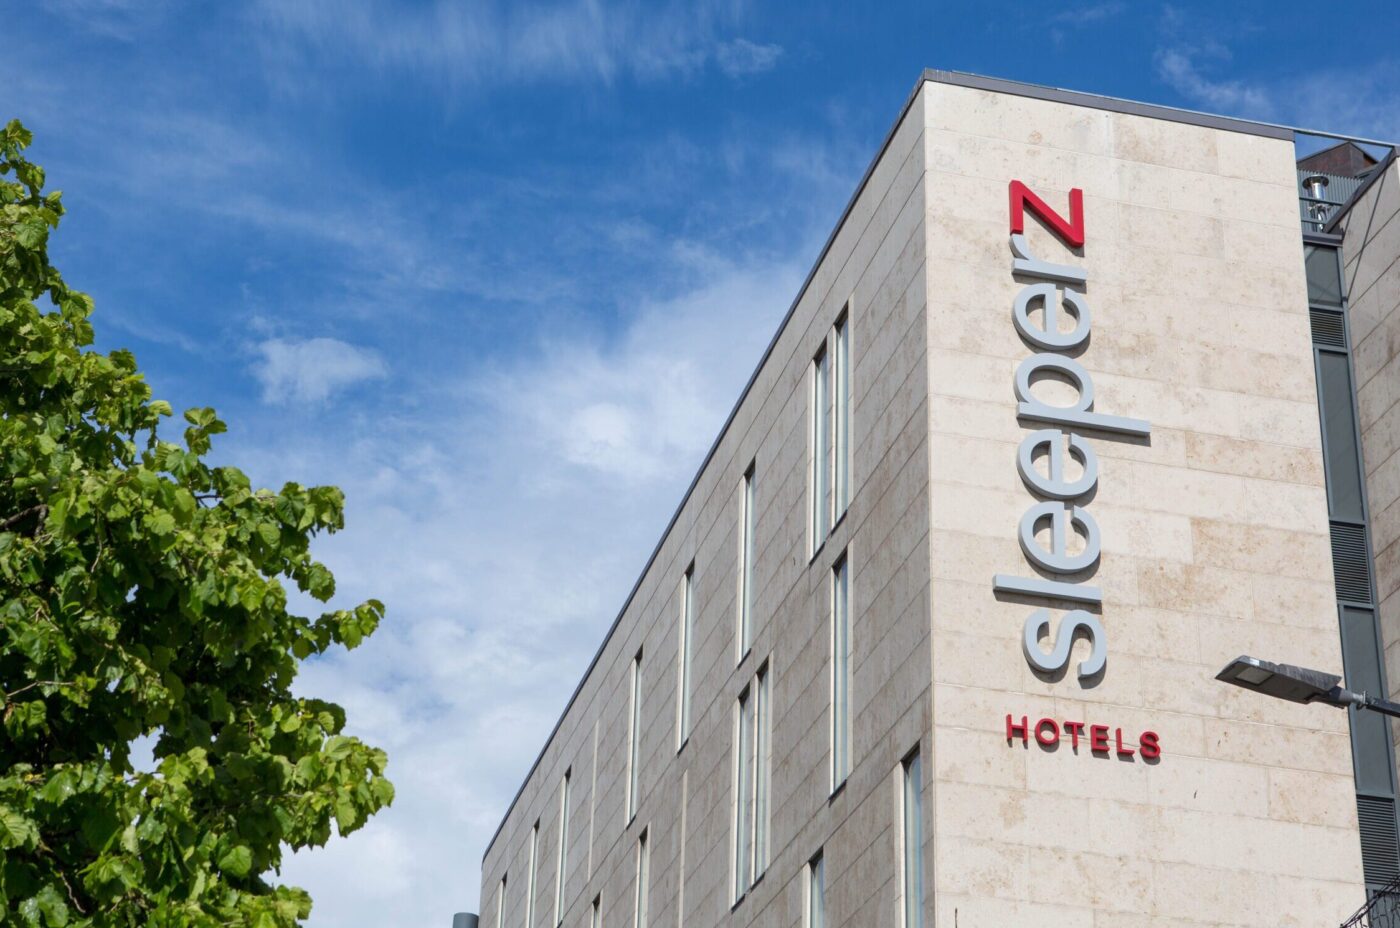 The exterior of Sleeperz Hotel